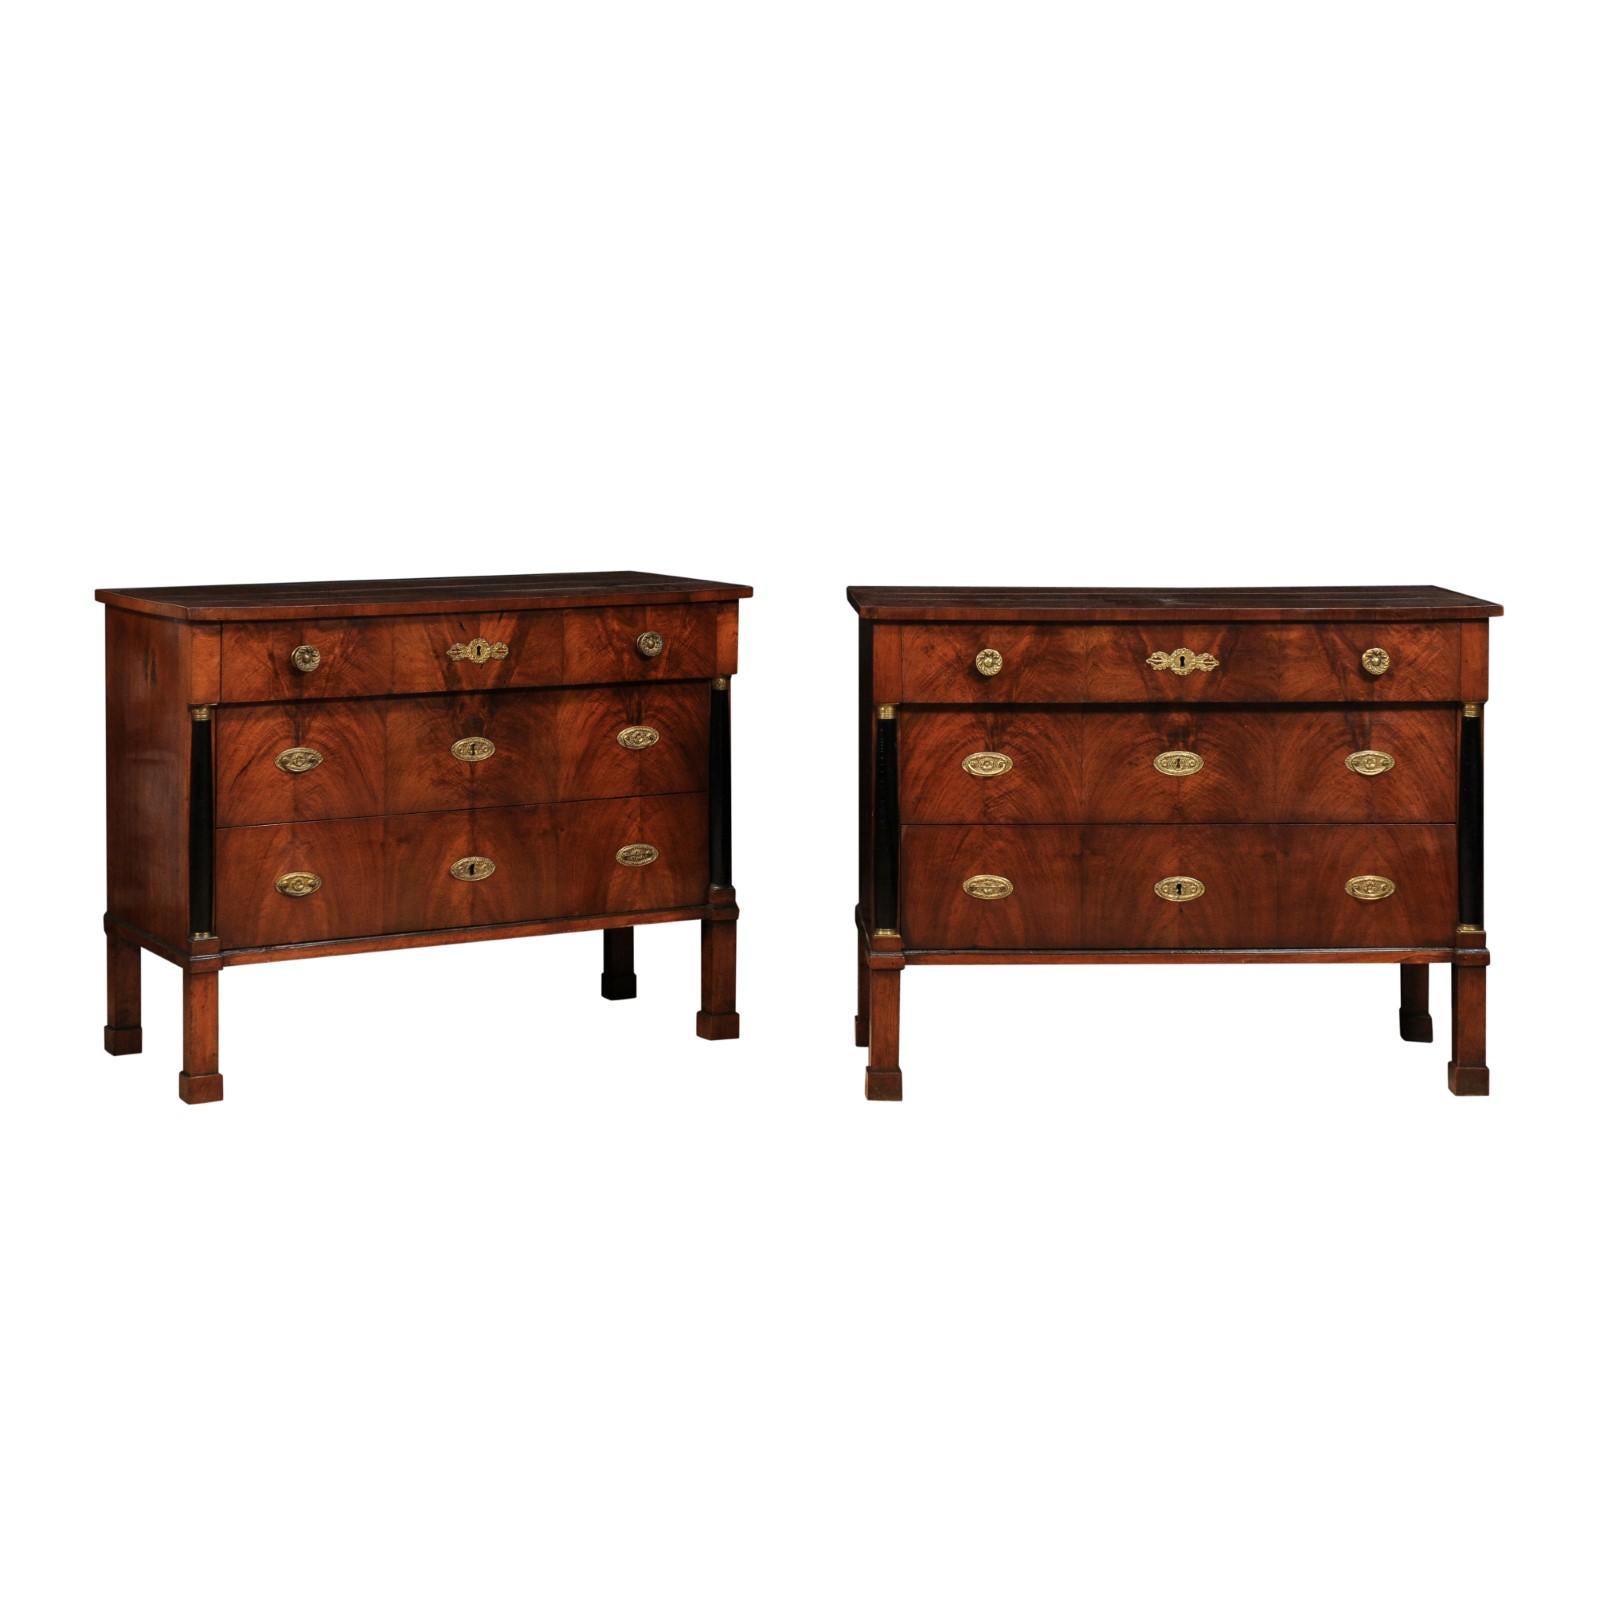 A pair of Italian Empire period walnut and mahogany commodes from circa 1820 with three drawers, bookmatched veneer, ebonized columns and bronze hardware. Imbue your home with the rich patina of history with this exquisite pair of Italian Empire